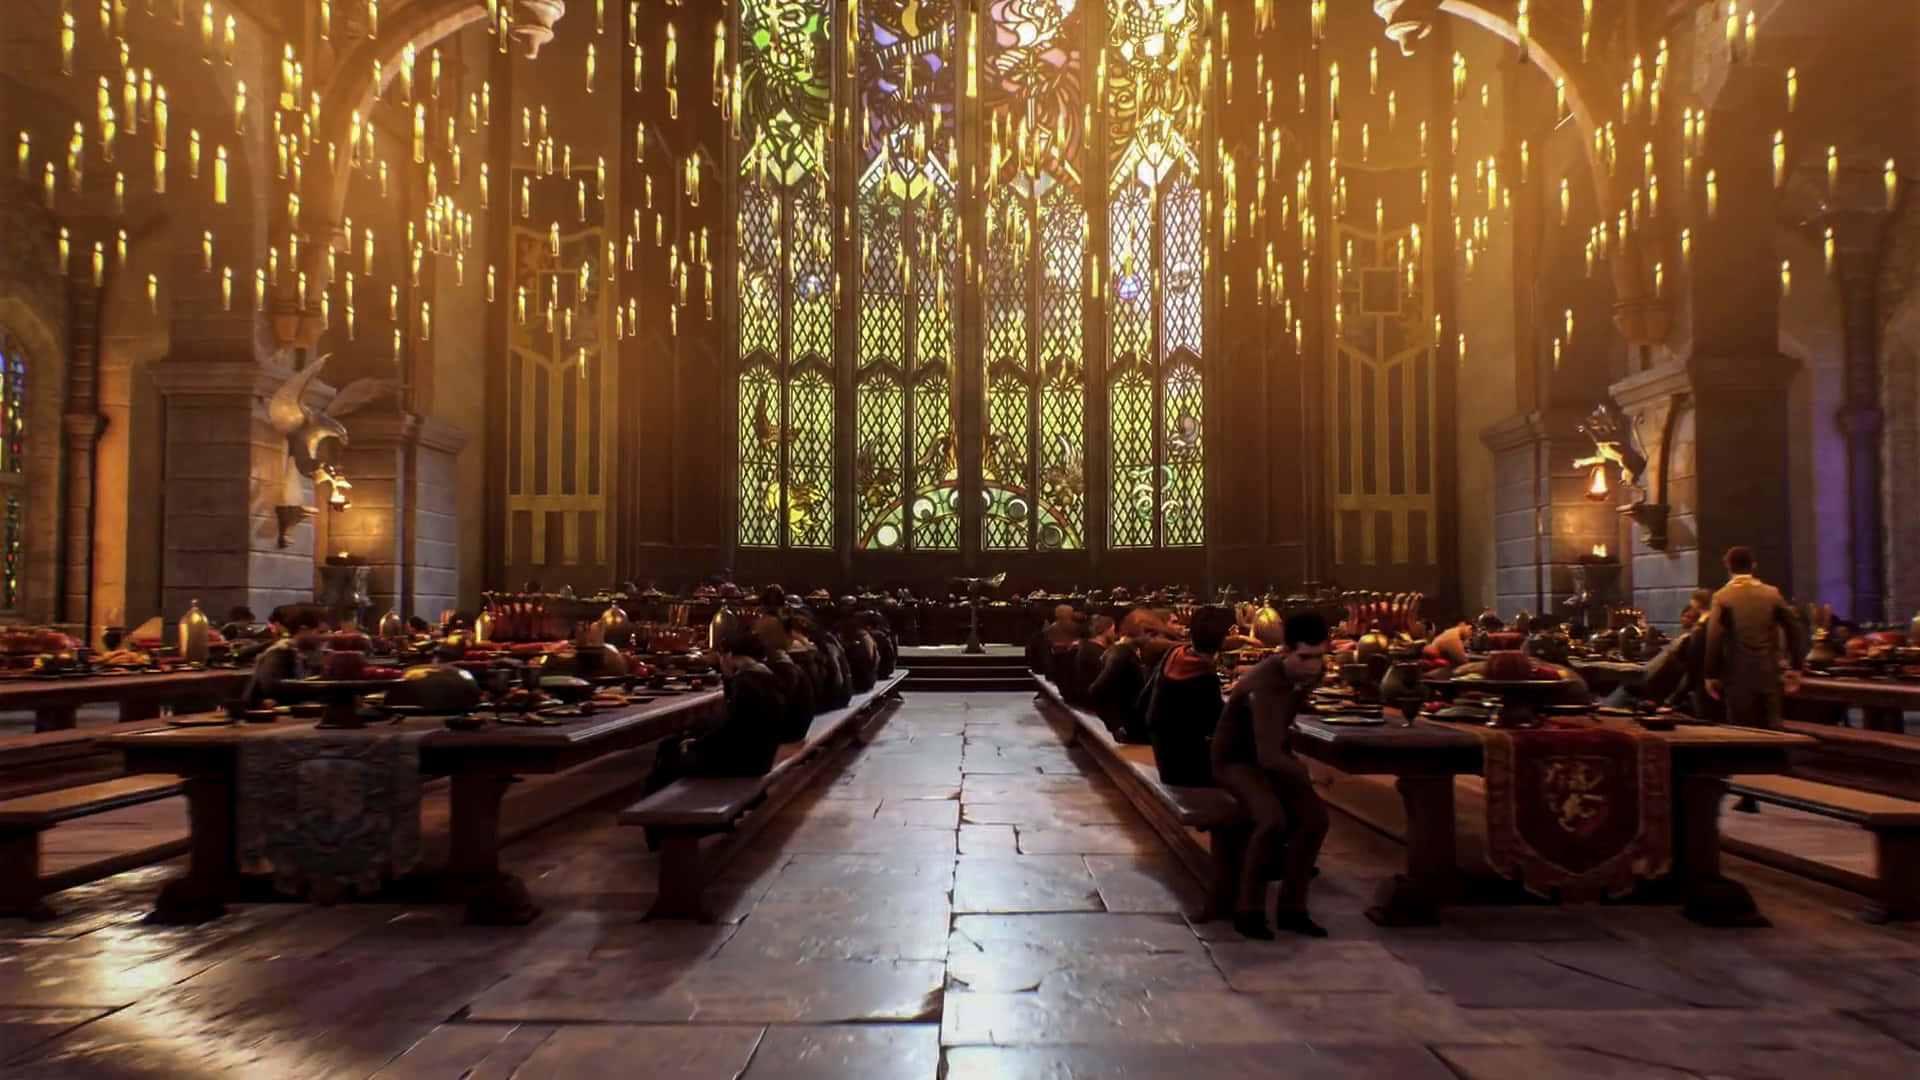 Gather in The Hogwarts Great Hall Wallpaper